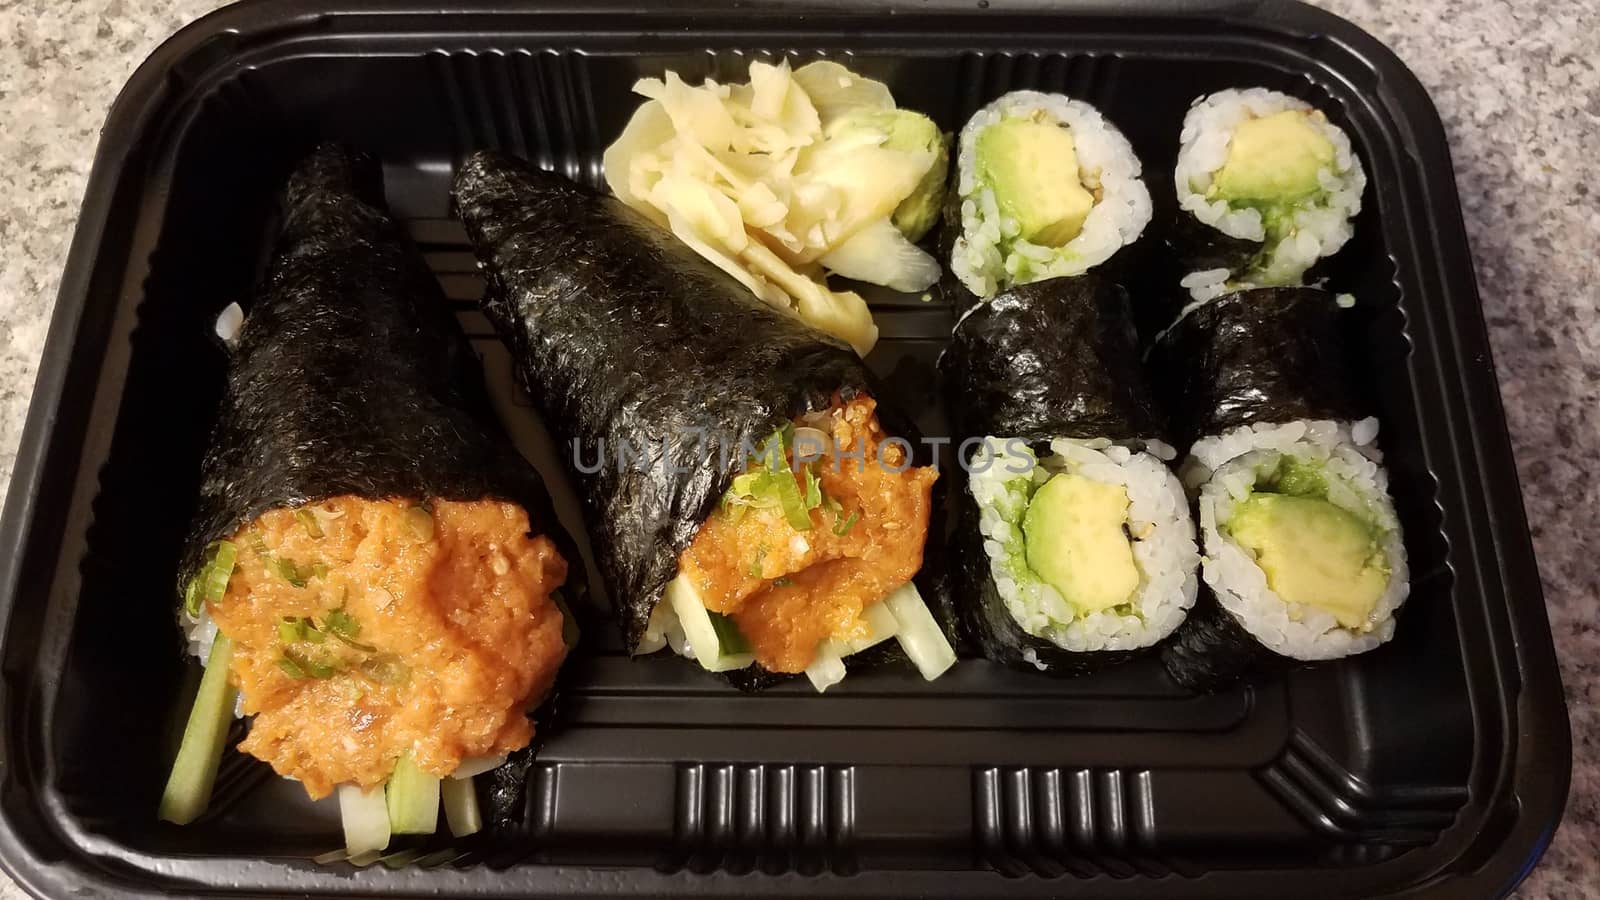 spicy tuna and handroll and avocado sushi in container on counter